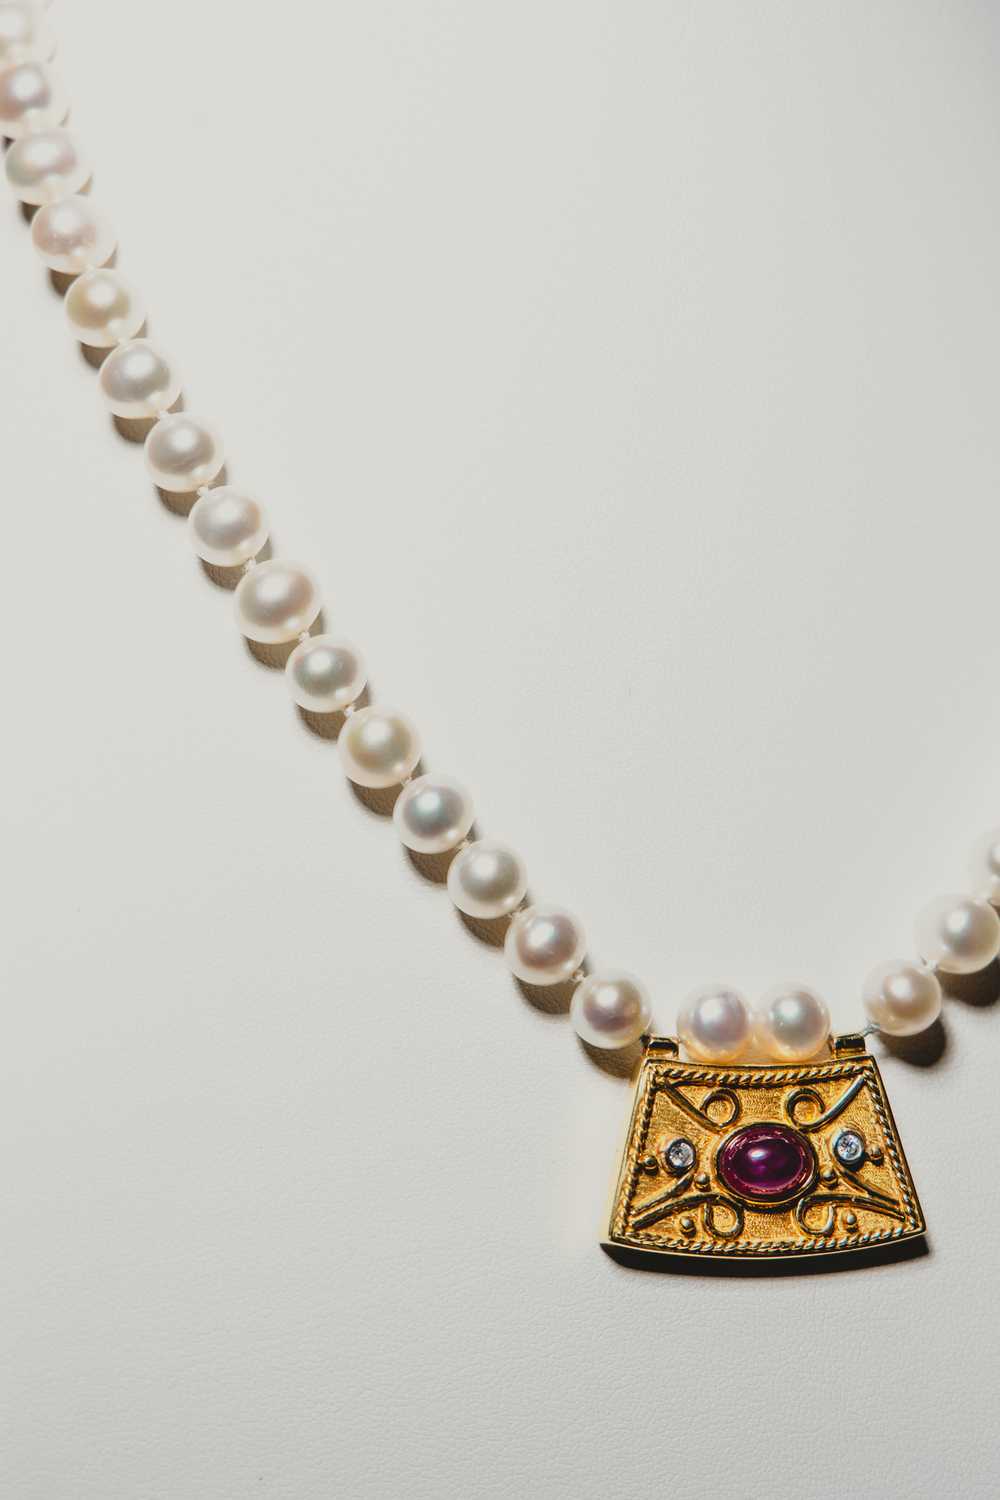 Pearl Necklace with Gold and Ruby Pendant - image 2